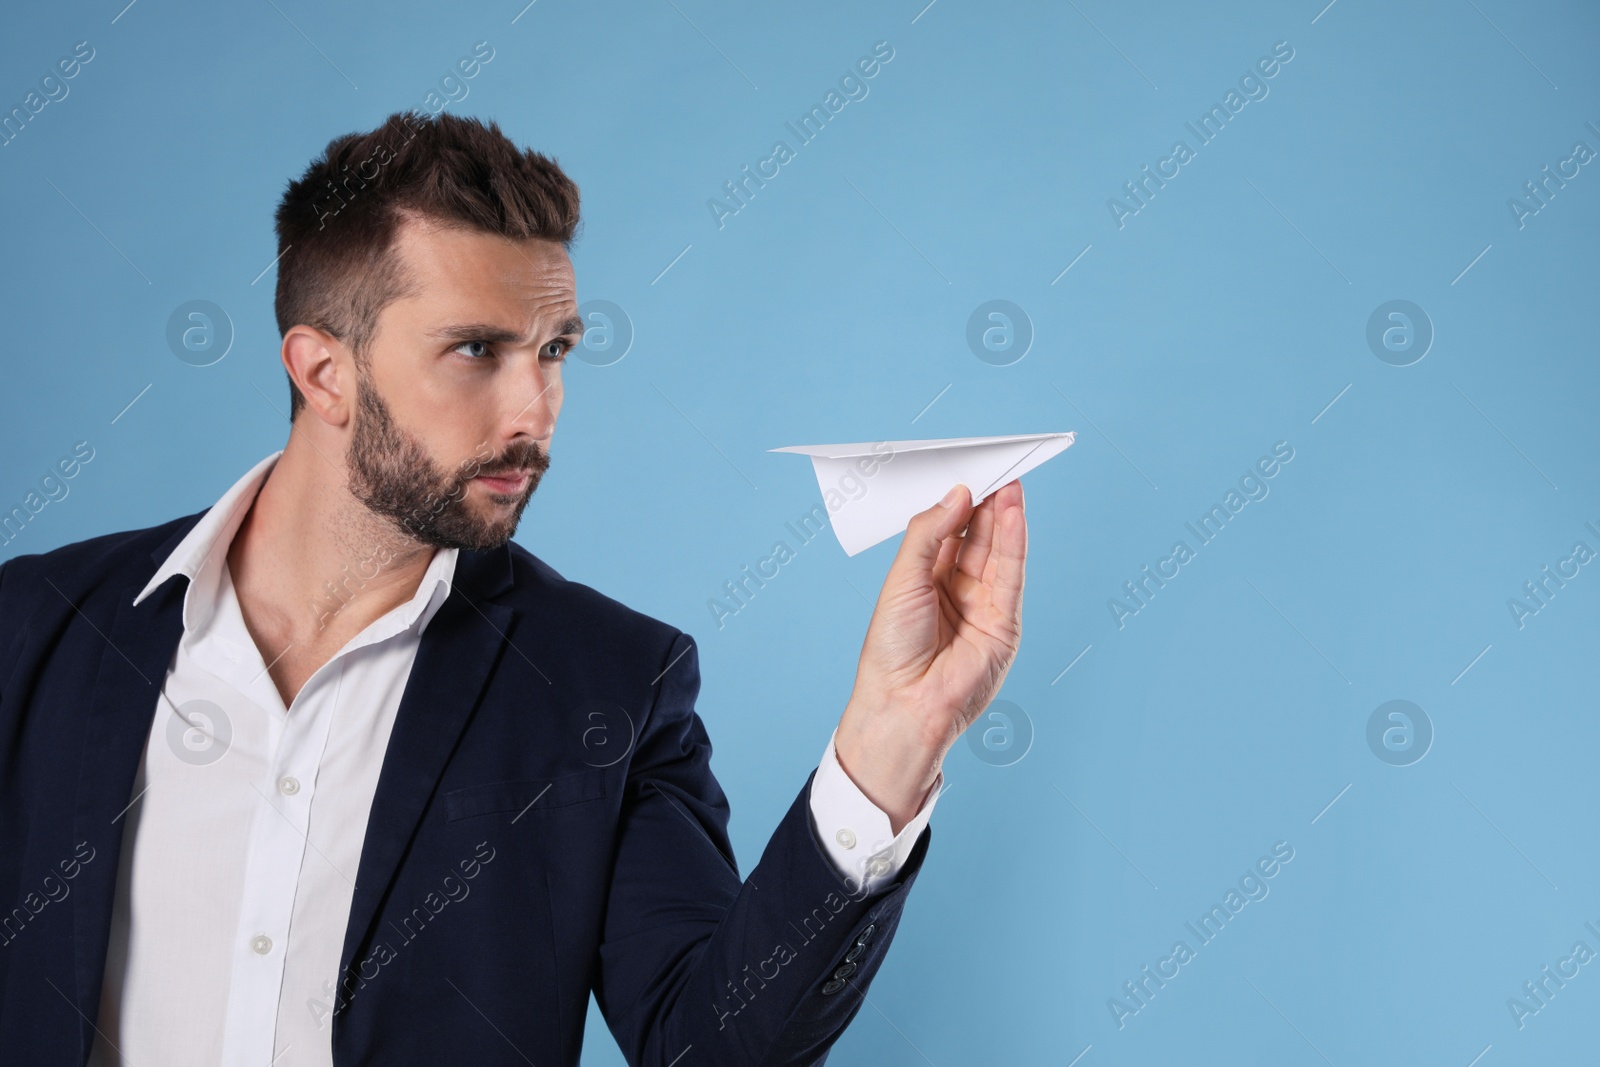 Photo of Handsome businessman playing with paper plane on light blue background. Space for text